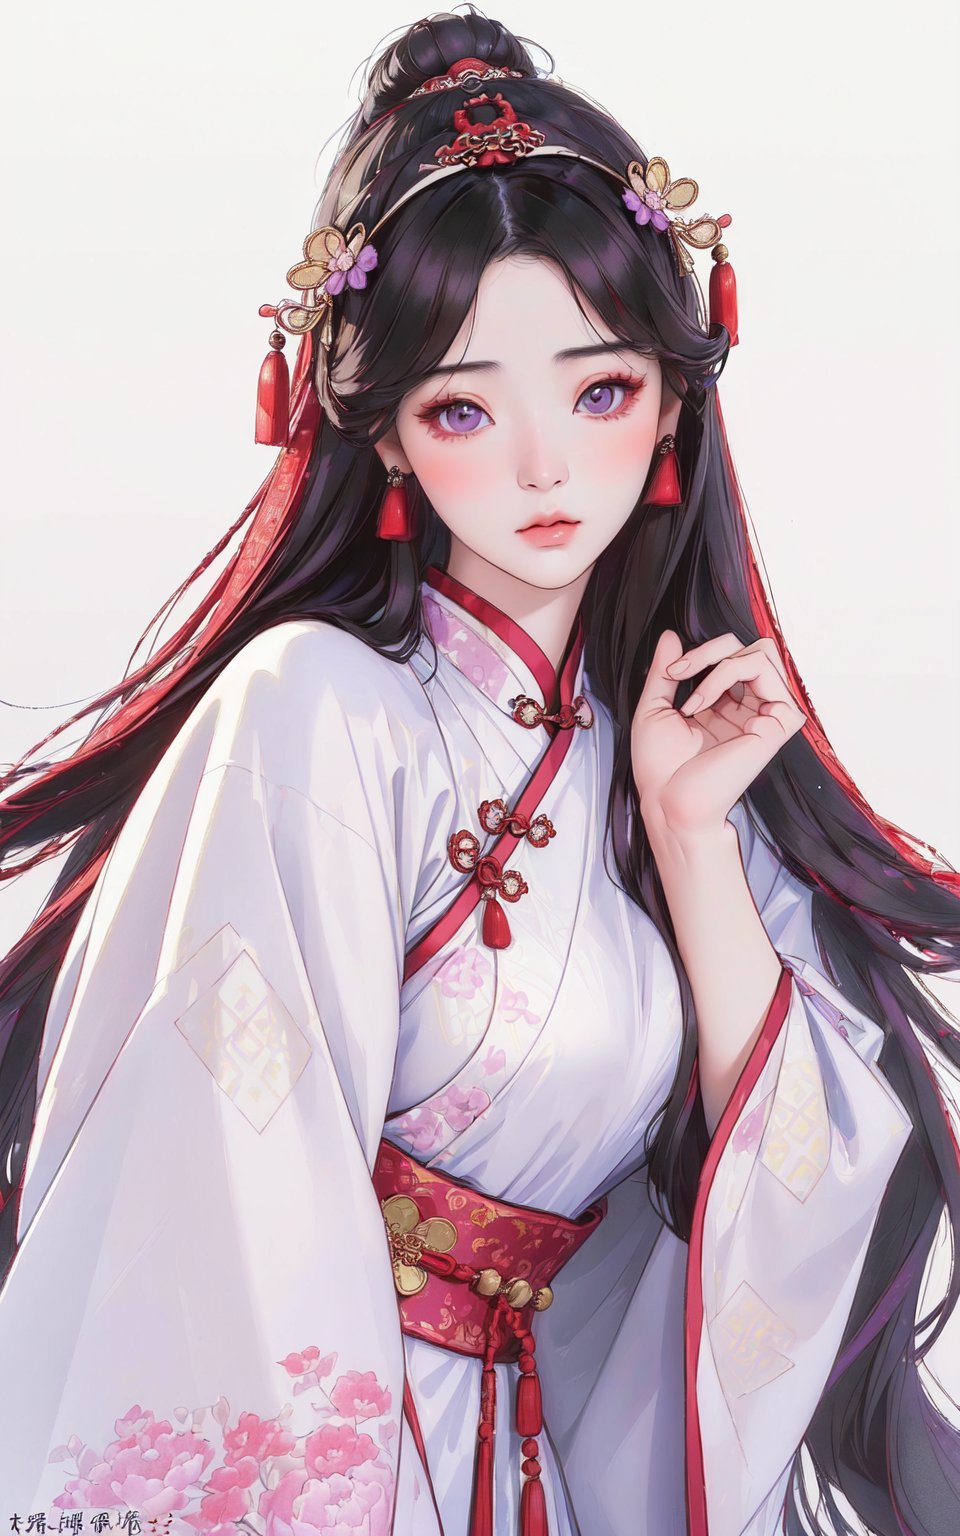 (Photorealistic:1.5) masterpiece of an immortal Chinese xianxia girl with narrow face and small eyes stands confidently, soft pastel theme, black, red, purple, (facing and looking at the viewer directly:1.5) in a medium fullshot composition. Her intricate clothing features realistic fabric textures, detailed to perfection. Against a simple background, she is rendered in stunning 2.5D hand-drawn style with photorealistic shading and coloring achieved through the use of color pencils and thick outlines. The overall lighting is dramatic and from the left, with soft white hues.

realistic eyes, realistic outfit, realistic face shape